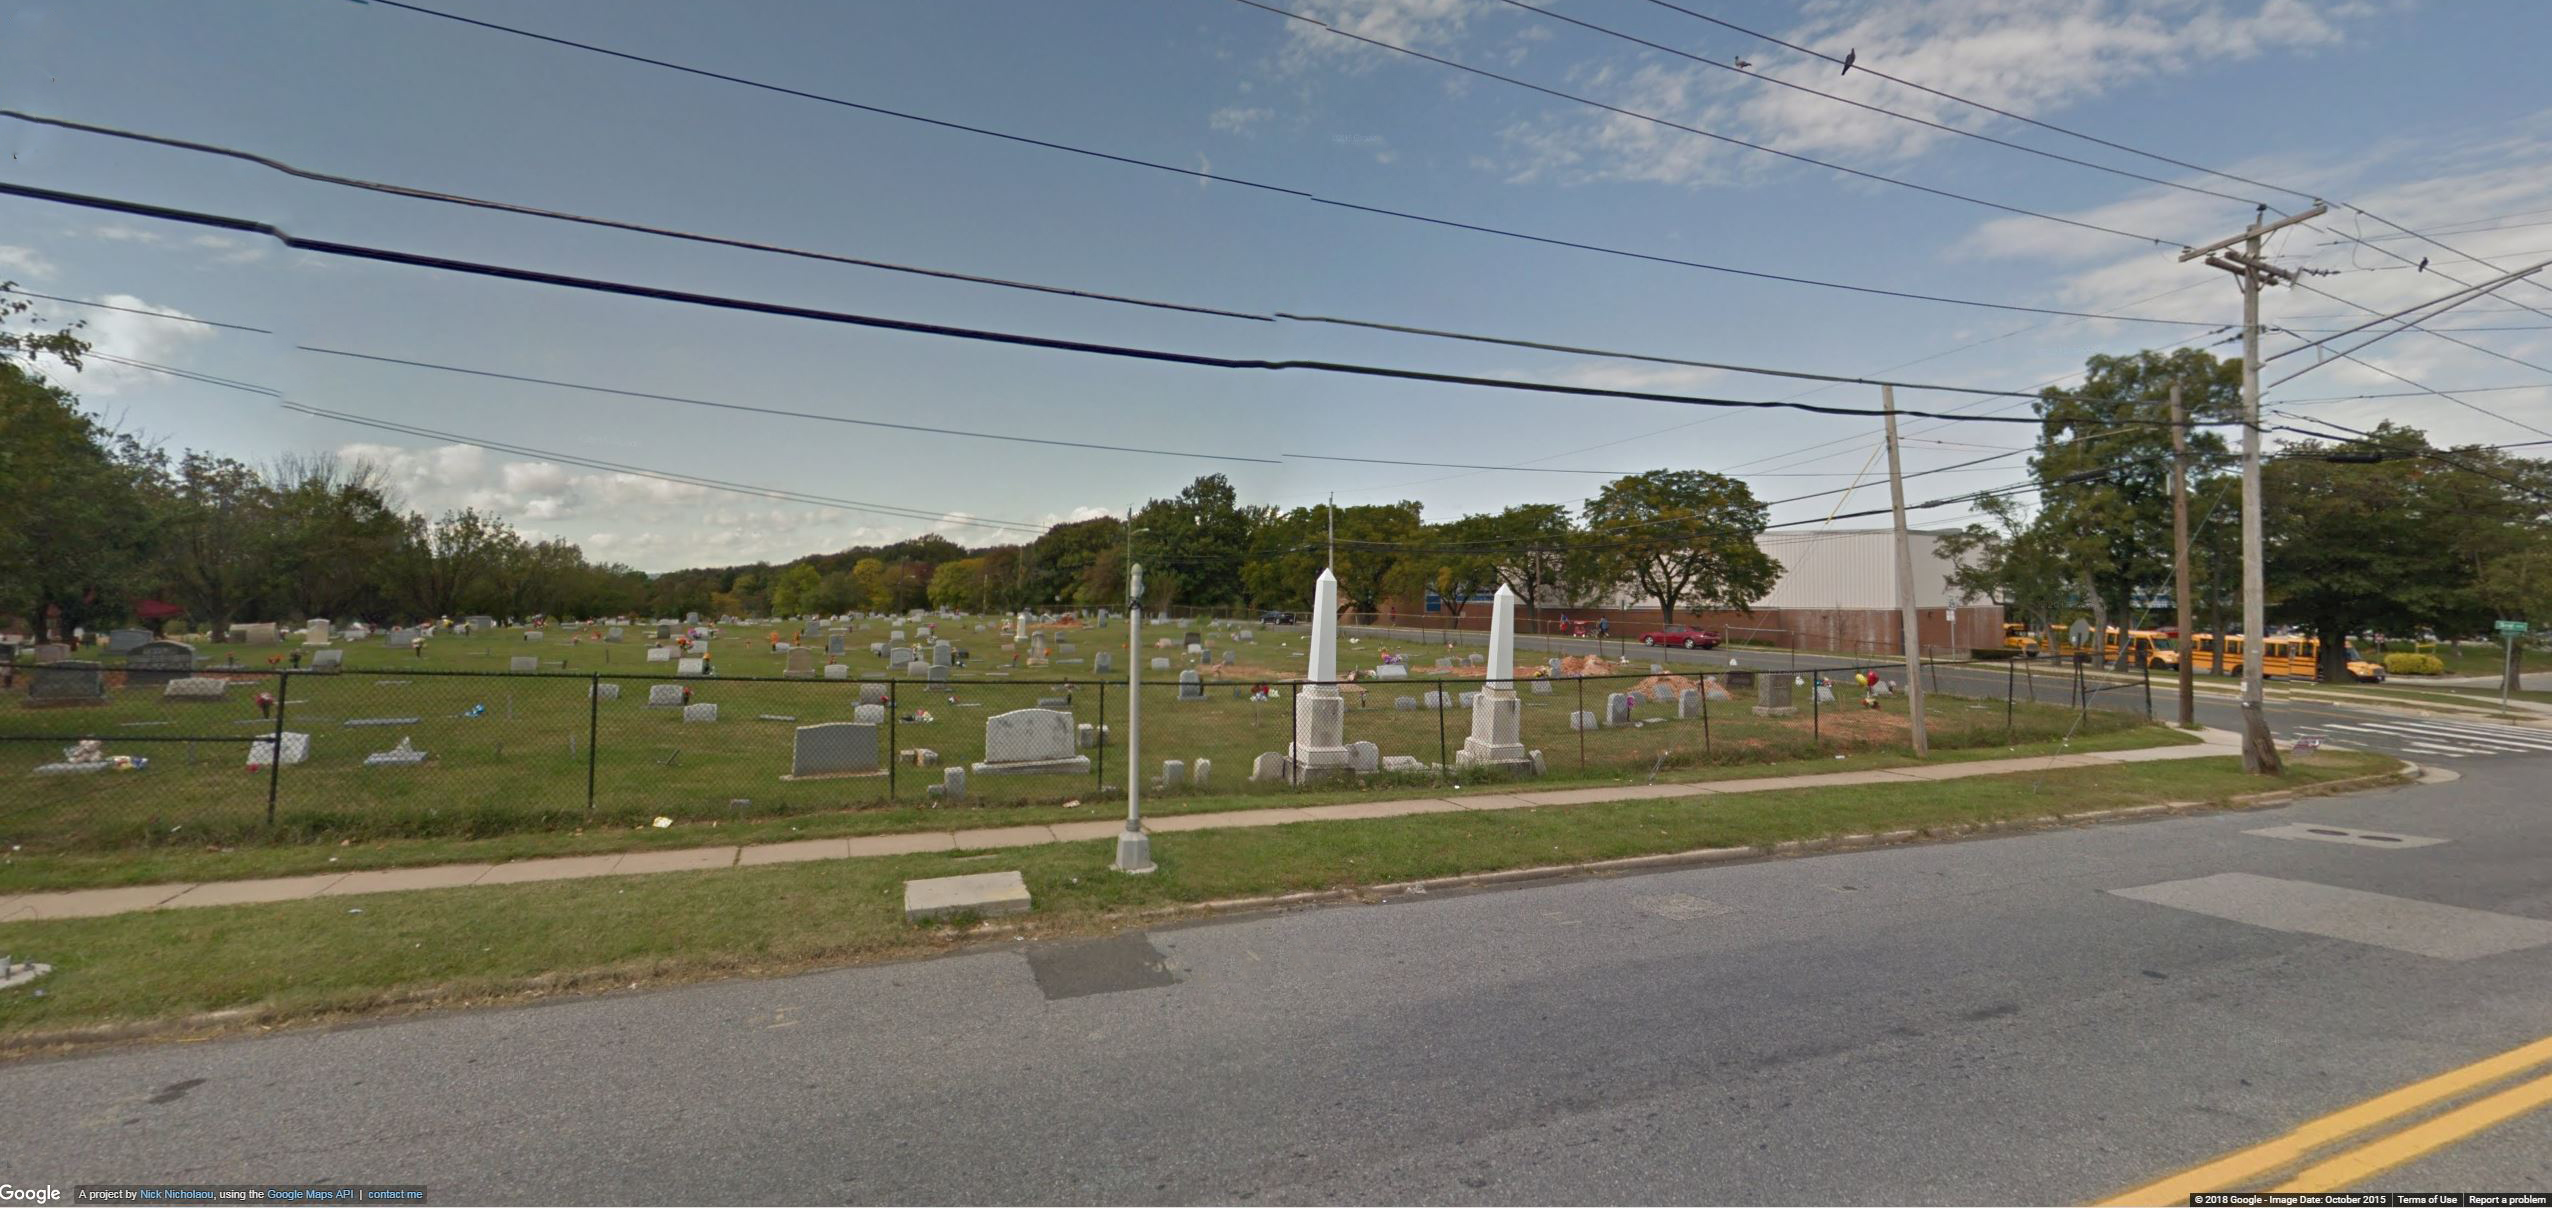 PHOTO: Mt. Zion Cemetery in Landsdowne, Maryland is pictured in this Google Maps image.